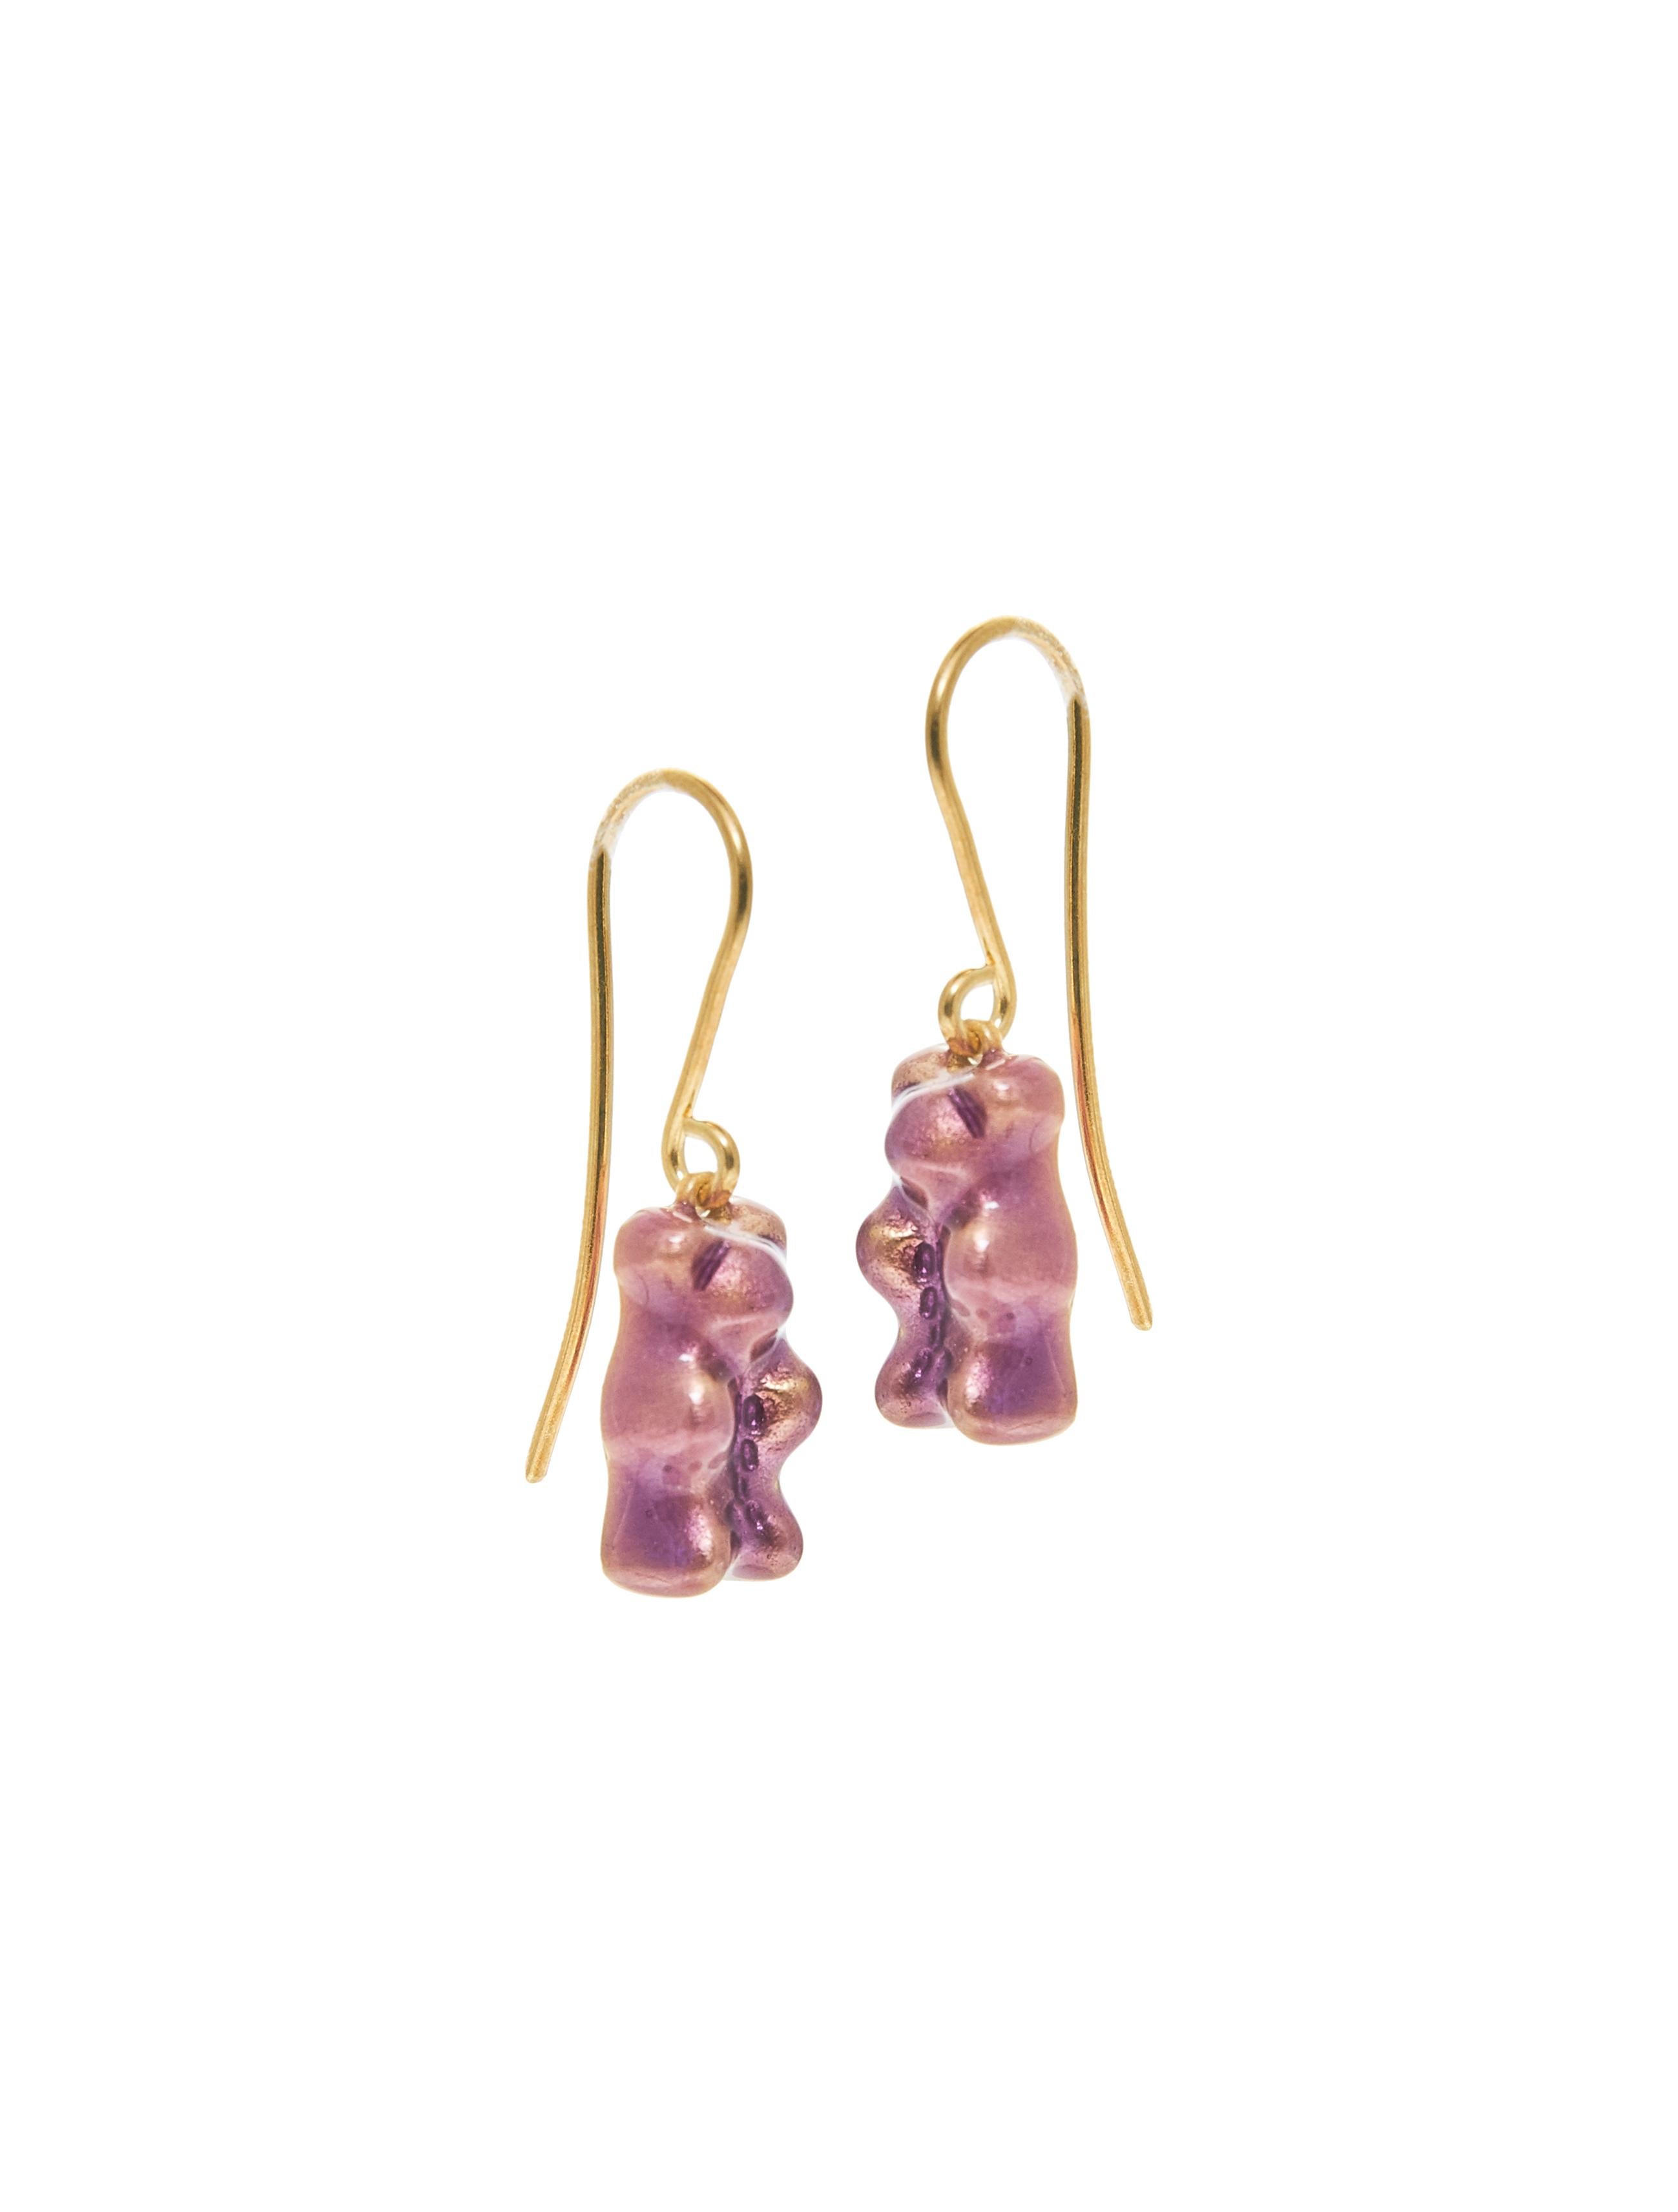 18K gold plated silver gummy bear drop earrings with transparent purple enamel coverage. 

The Gummy Project by Maggoosh is a capsule collection inspired by the designer's life in New York City and her passion for breakdancing and other street arts.